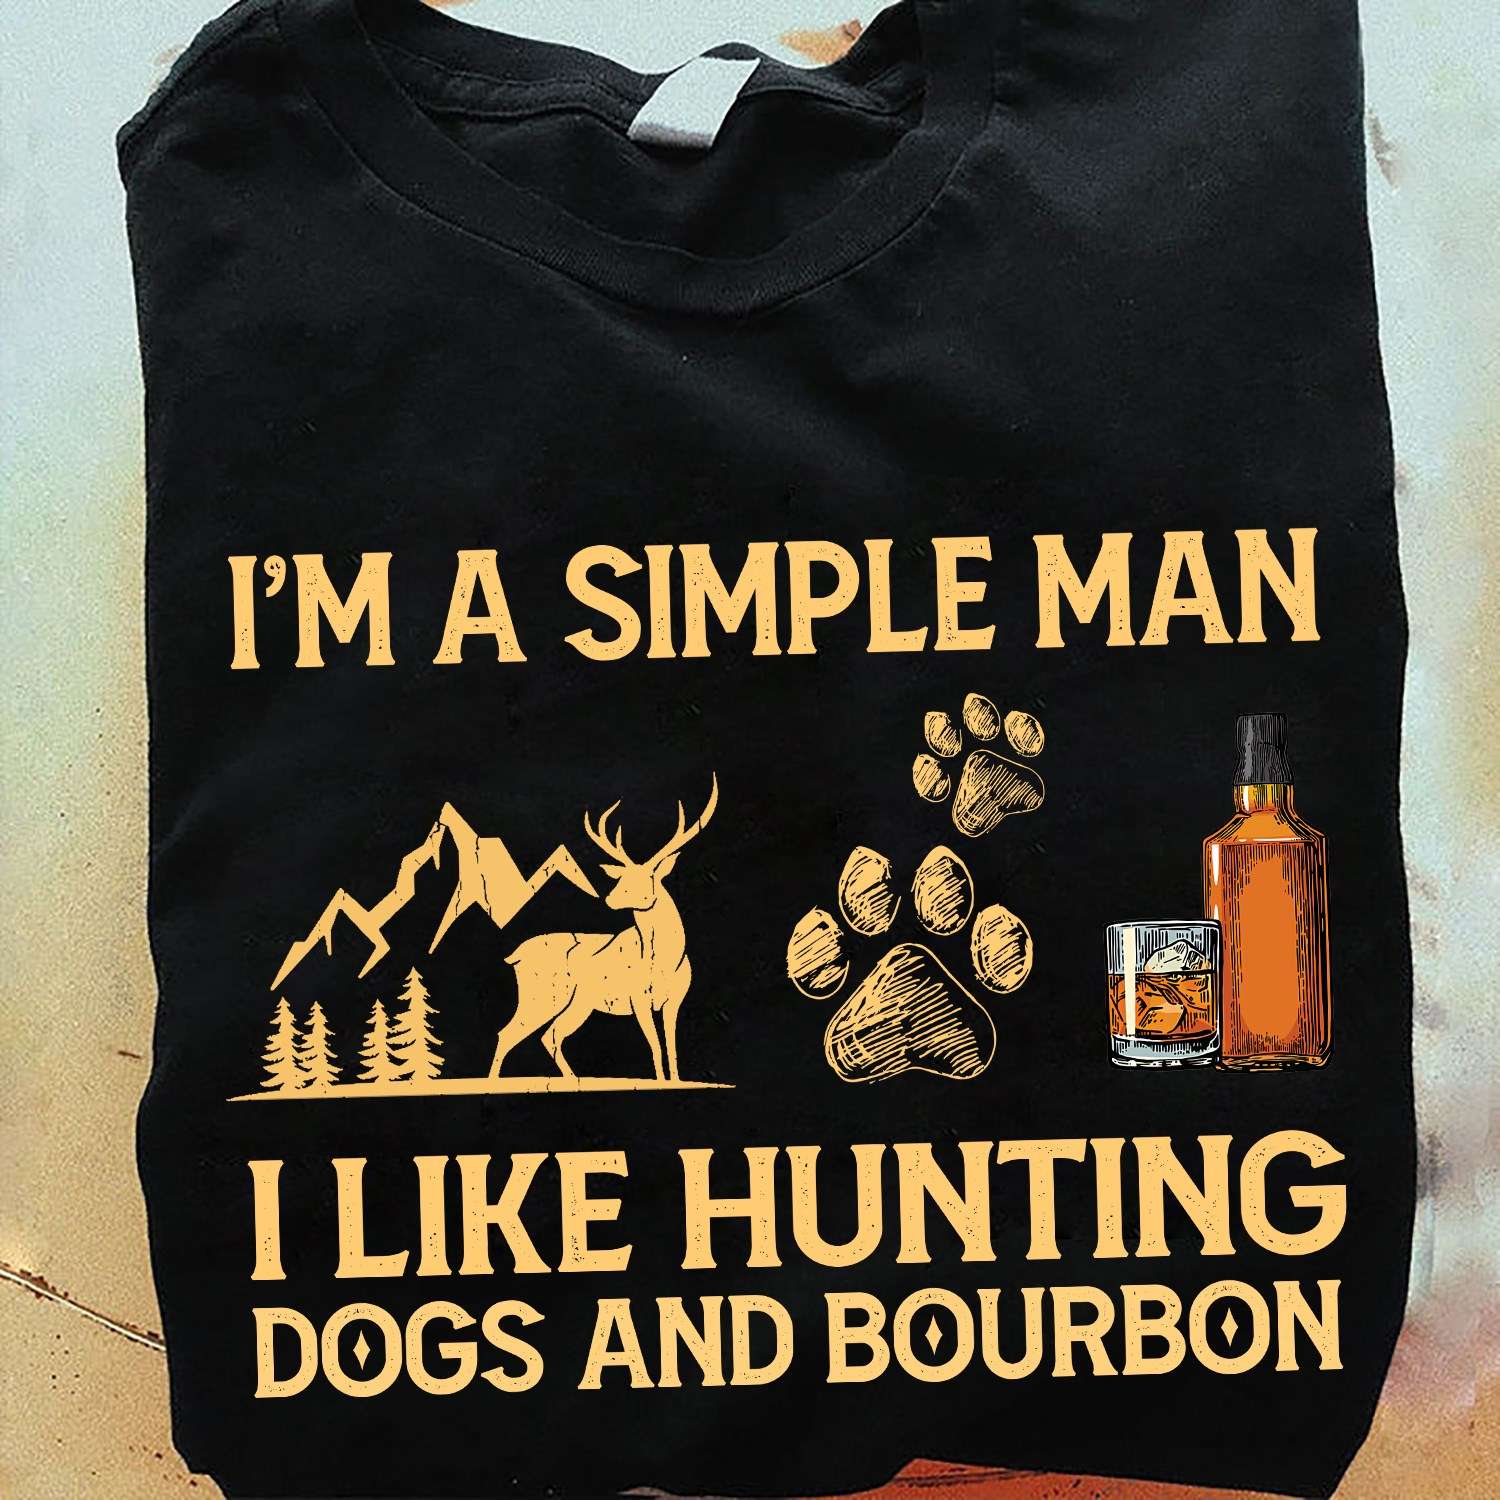 Deer Hunting Dogs And Bourbon - I'm a simple man i like hunting dogs and bourbon